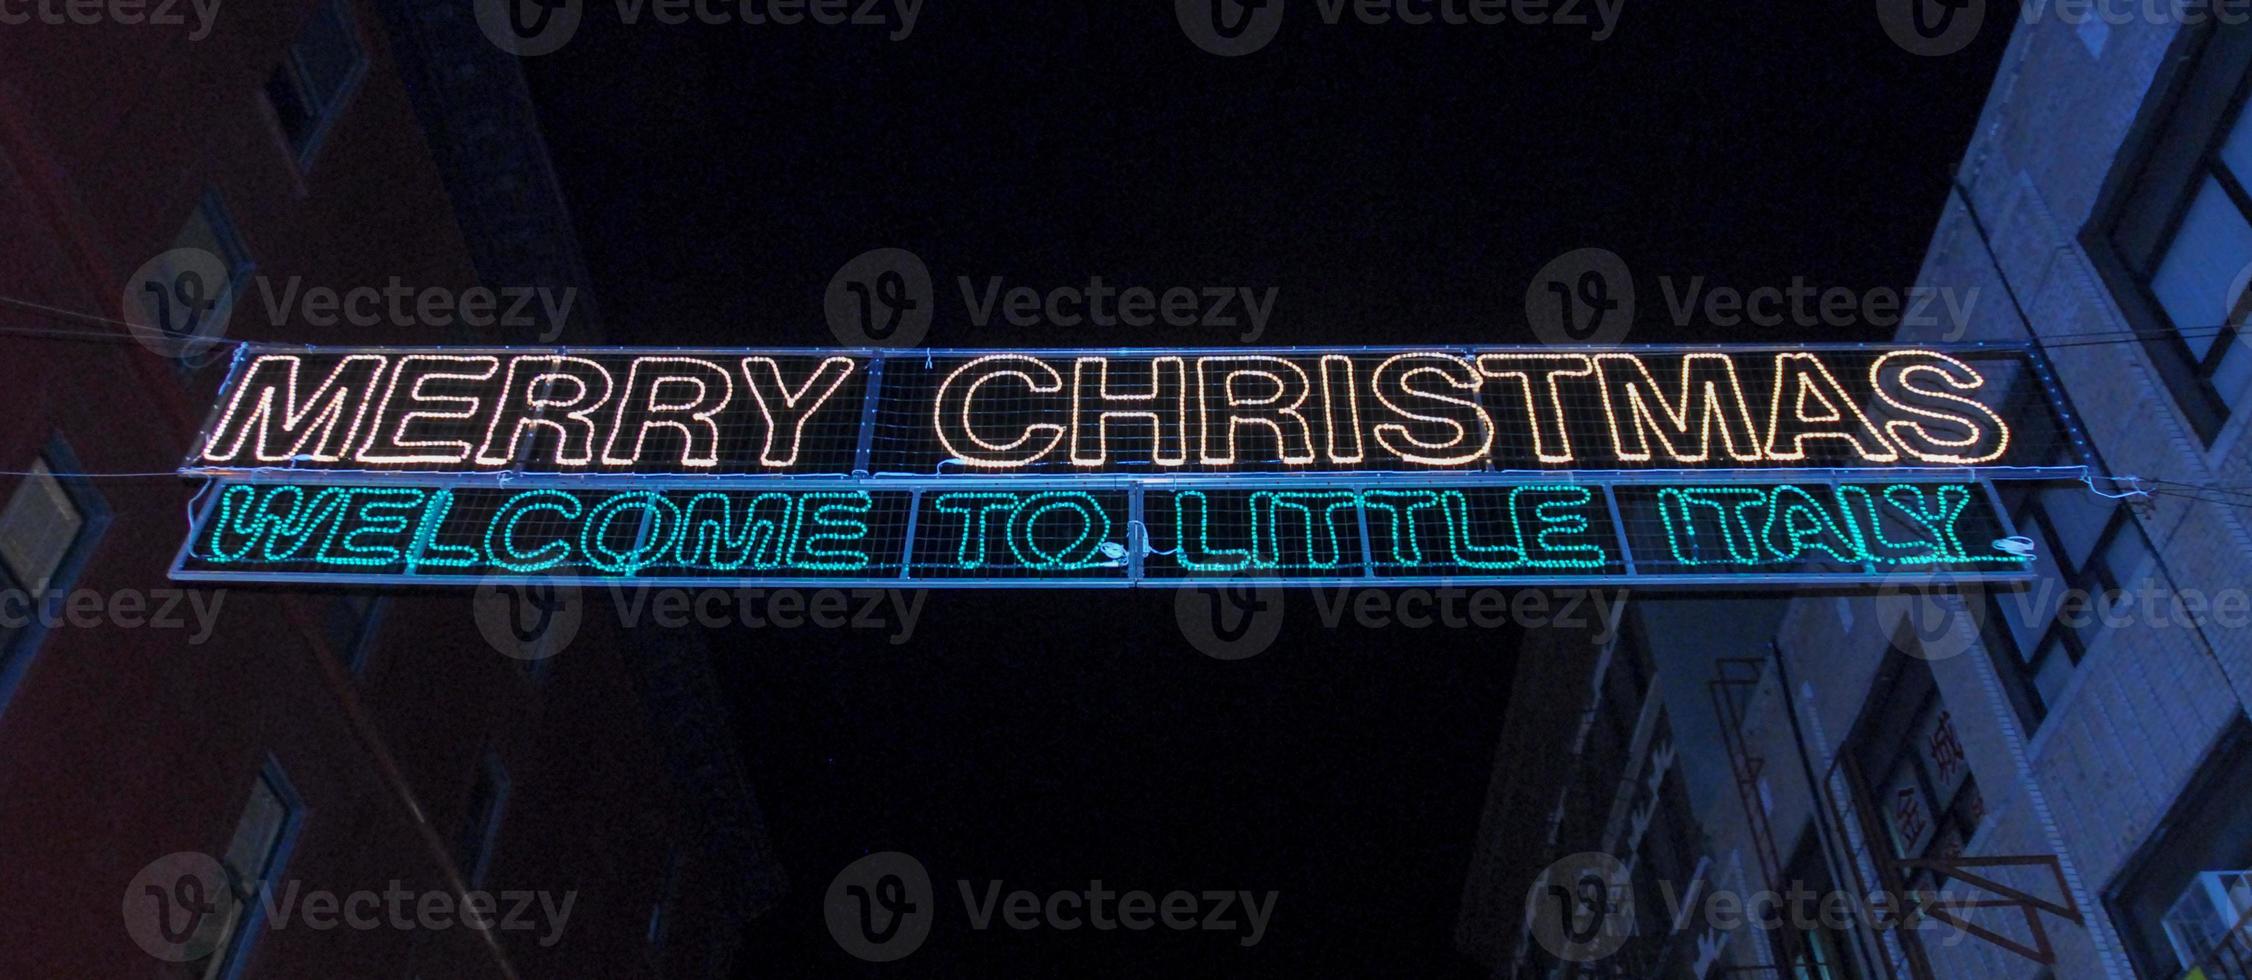 Welcome to Little Italy Sign during the holidays in New York City photo